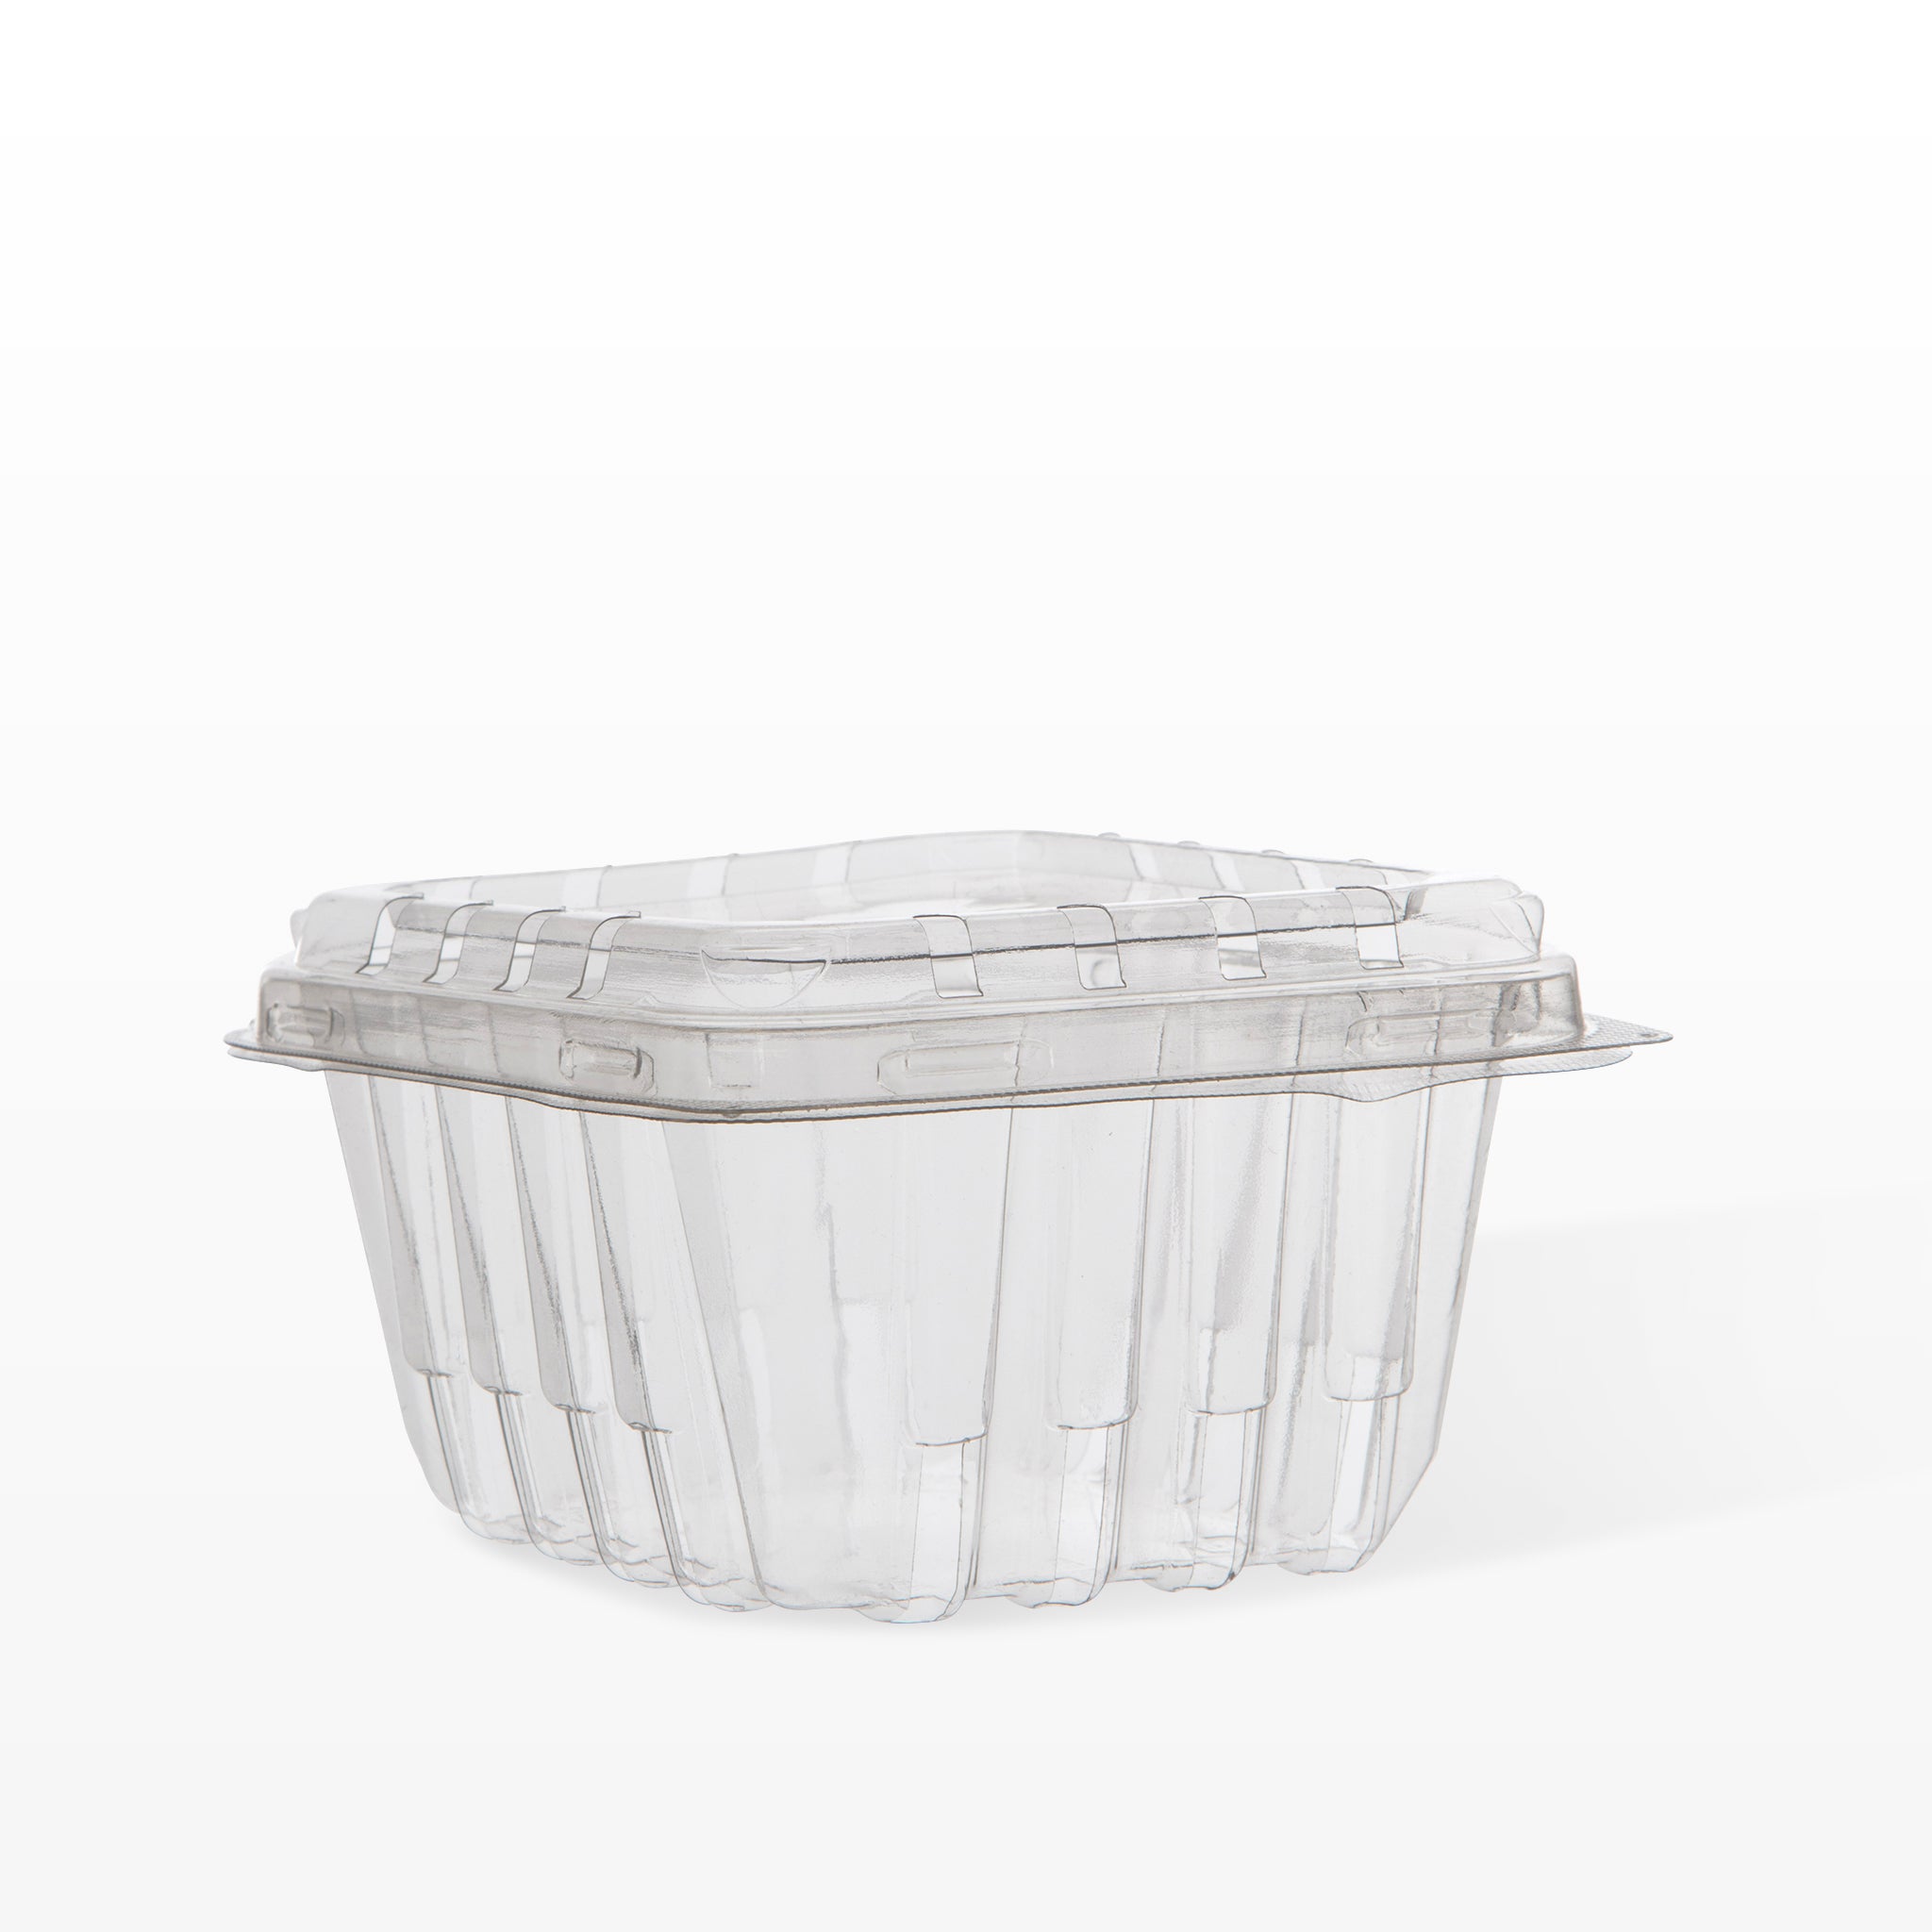 Clamshell, Clear Plastic Containers and Baskets for the grower and pickers  of fruits and vegetables.